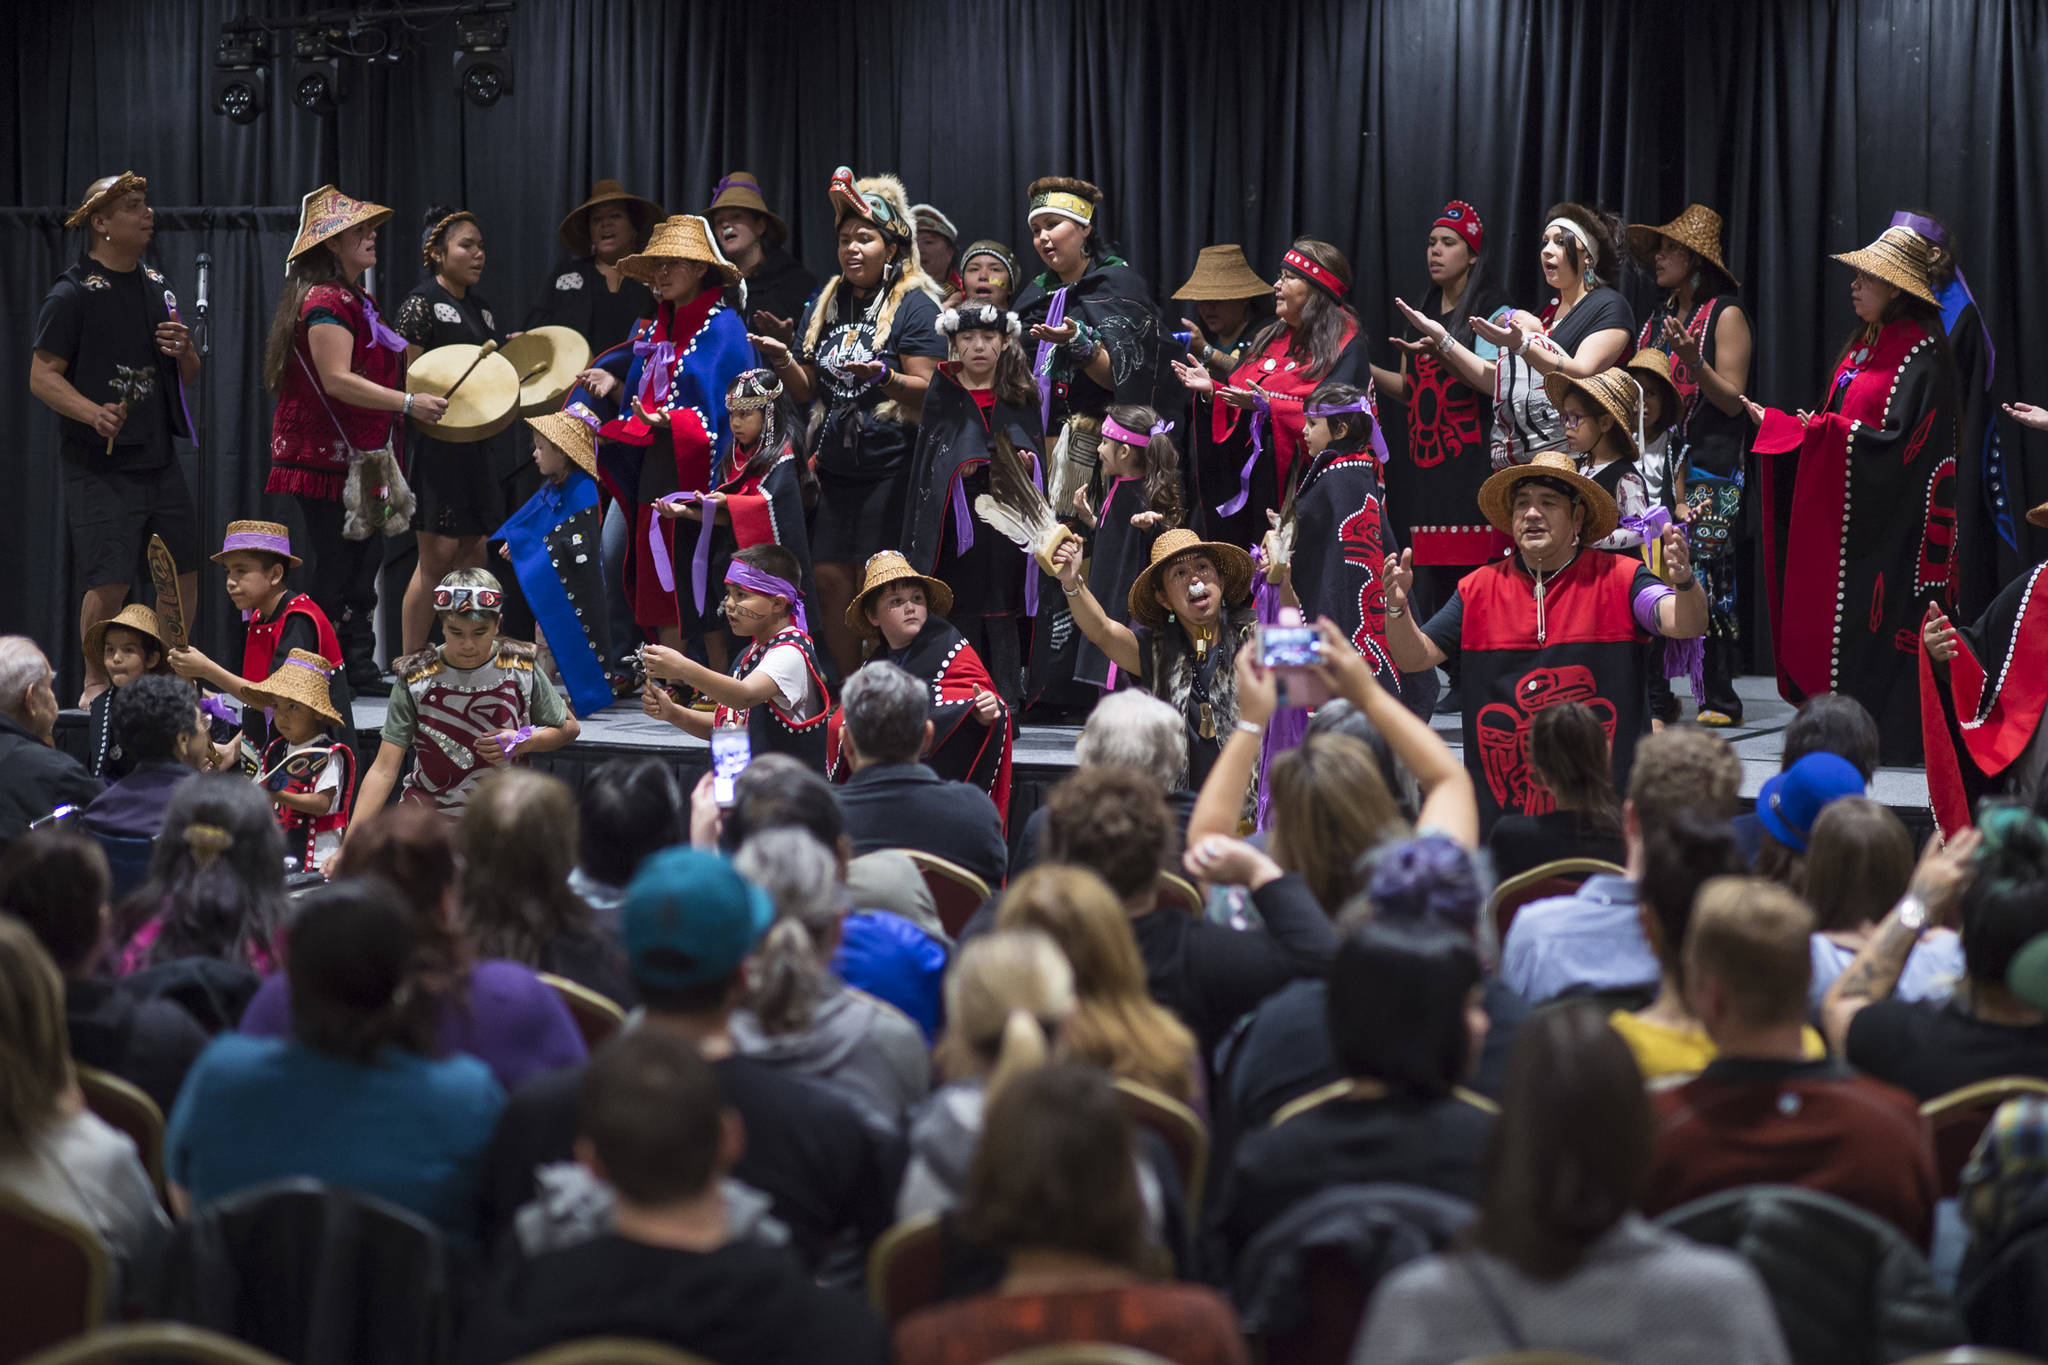 The Woosh.ji.een Dance Group makes a special performance at the Indigenous people performance titled “You Don’t Have To Go Home, But You Can’t Stay Here” at the Elizabeth Peratrovich Hall on Monday, Sept. 24, 2018. (Michael Penn | Juneau Empire)